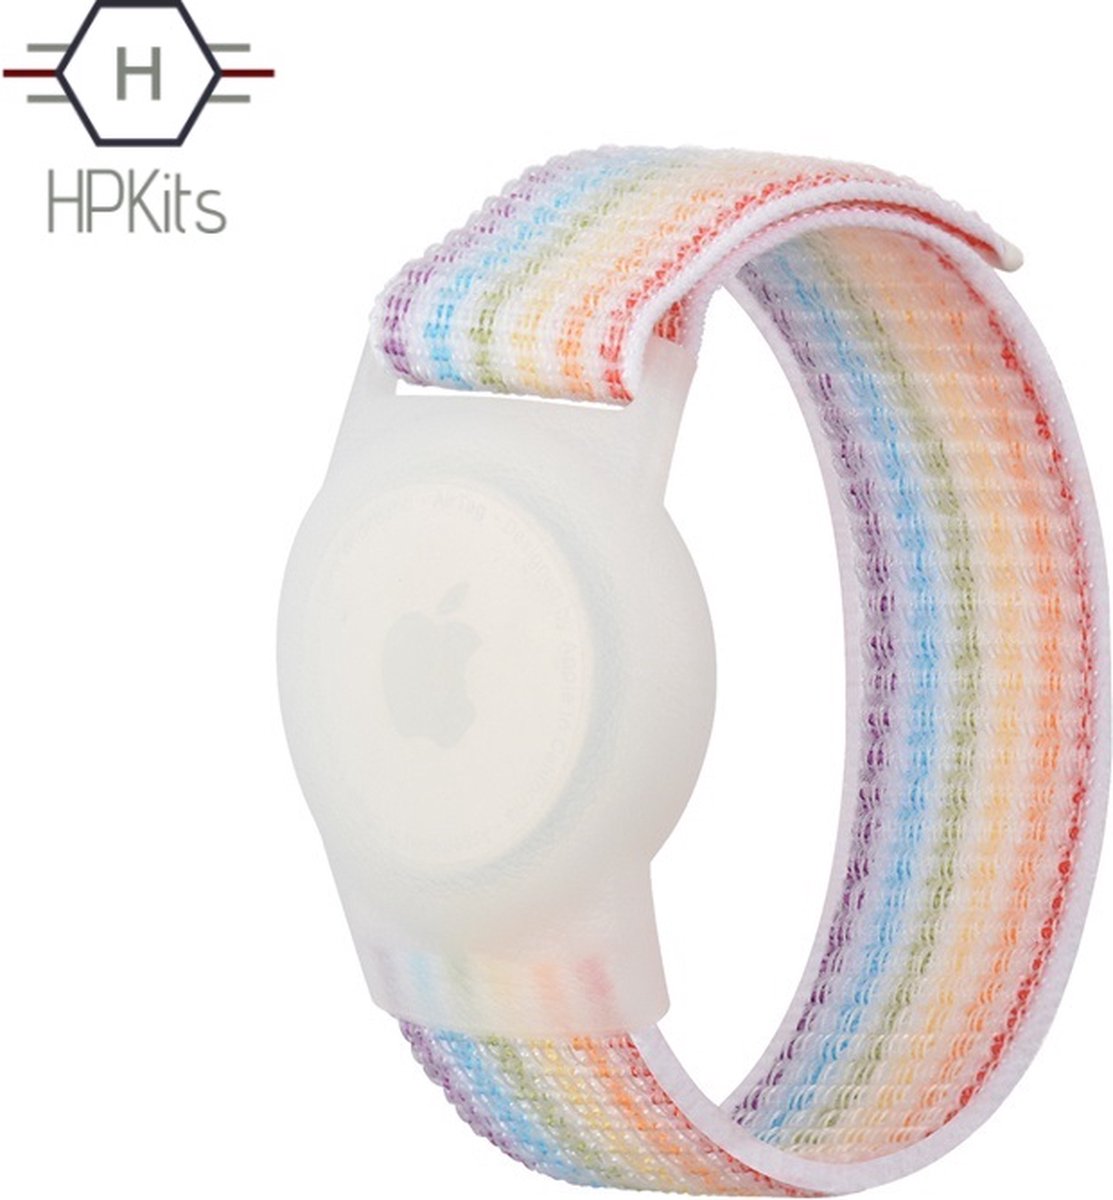 Airtag armband Polsband horloge - Airtag Sleutelhanger - Airtag Polsband Voor Kinderen - Airtag Armband - Airtag Apple - Klittenband - Airtag Houder - Airtag Hoesje - wit - multi colour